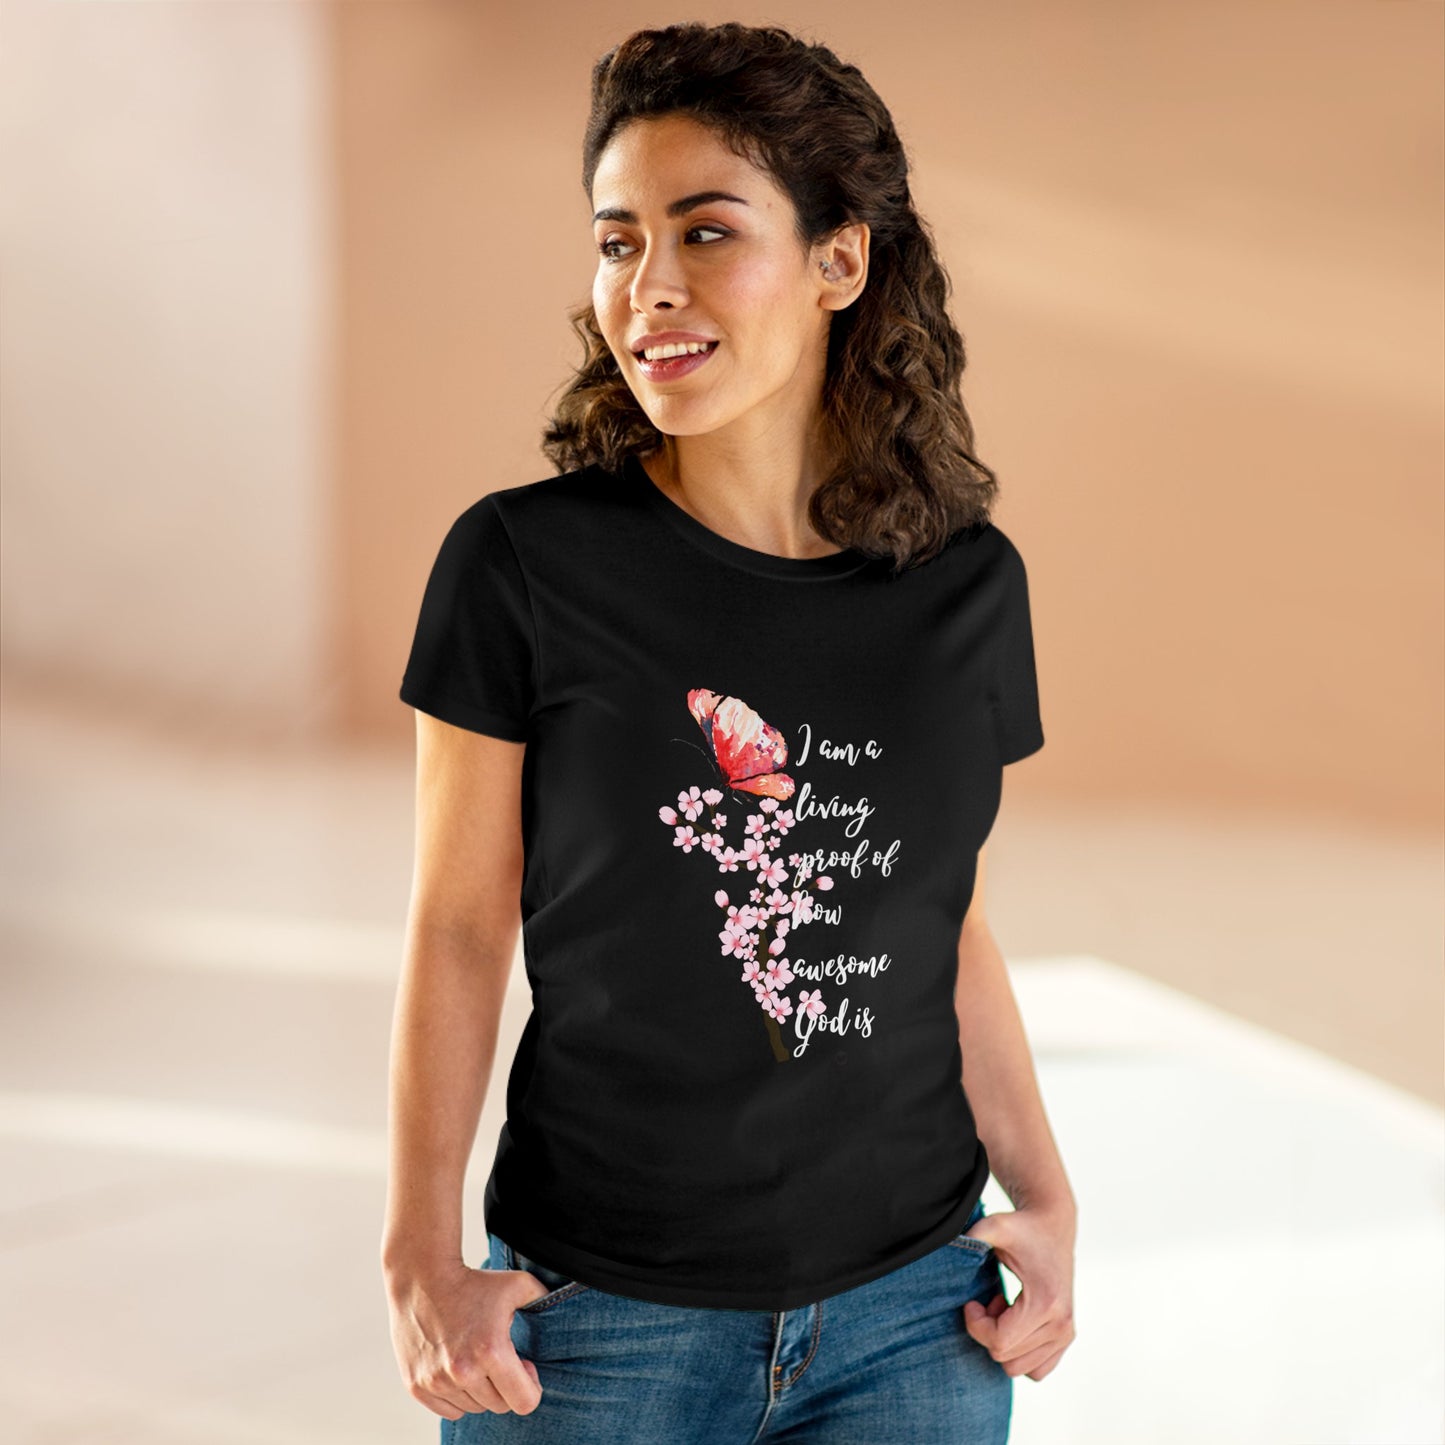 I AM A LIVING PROOF HOW AWESOME GOD IS - LADIES DRK TEE